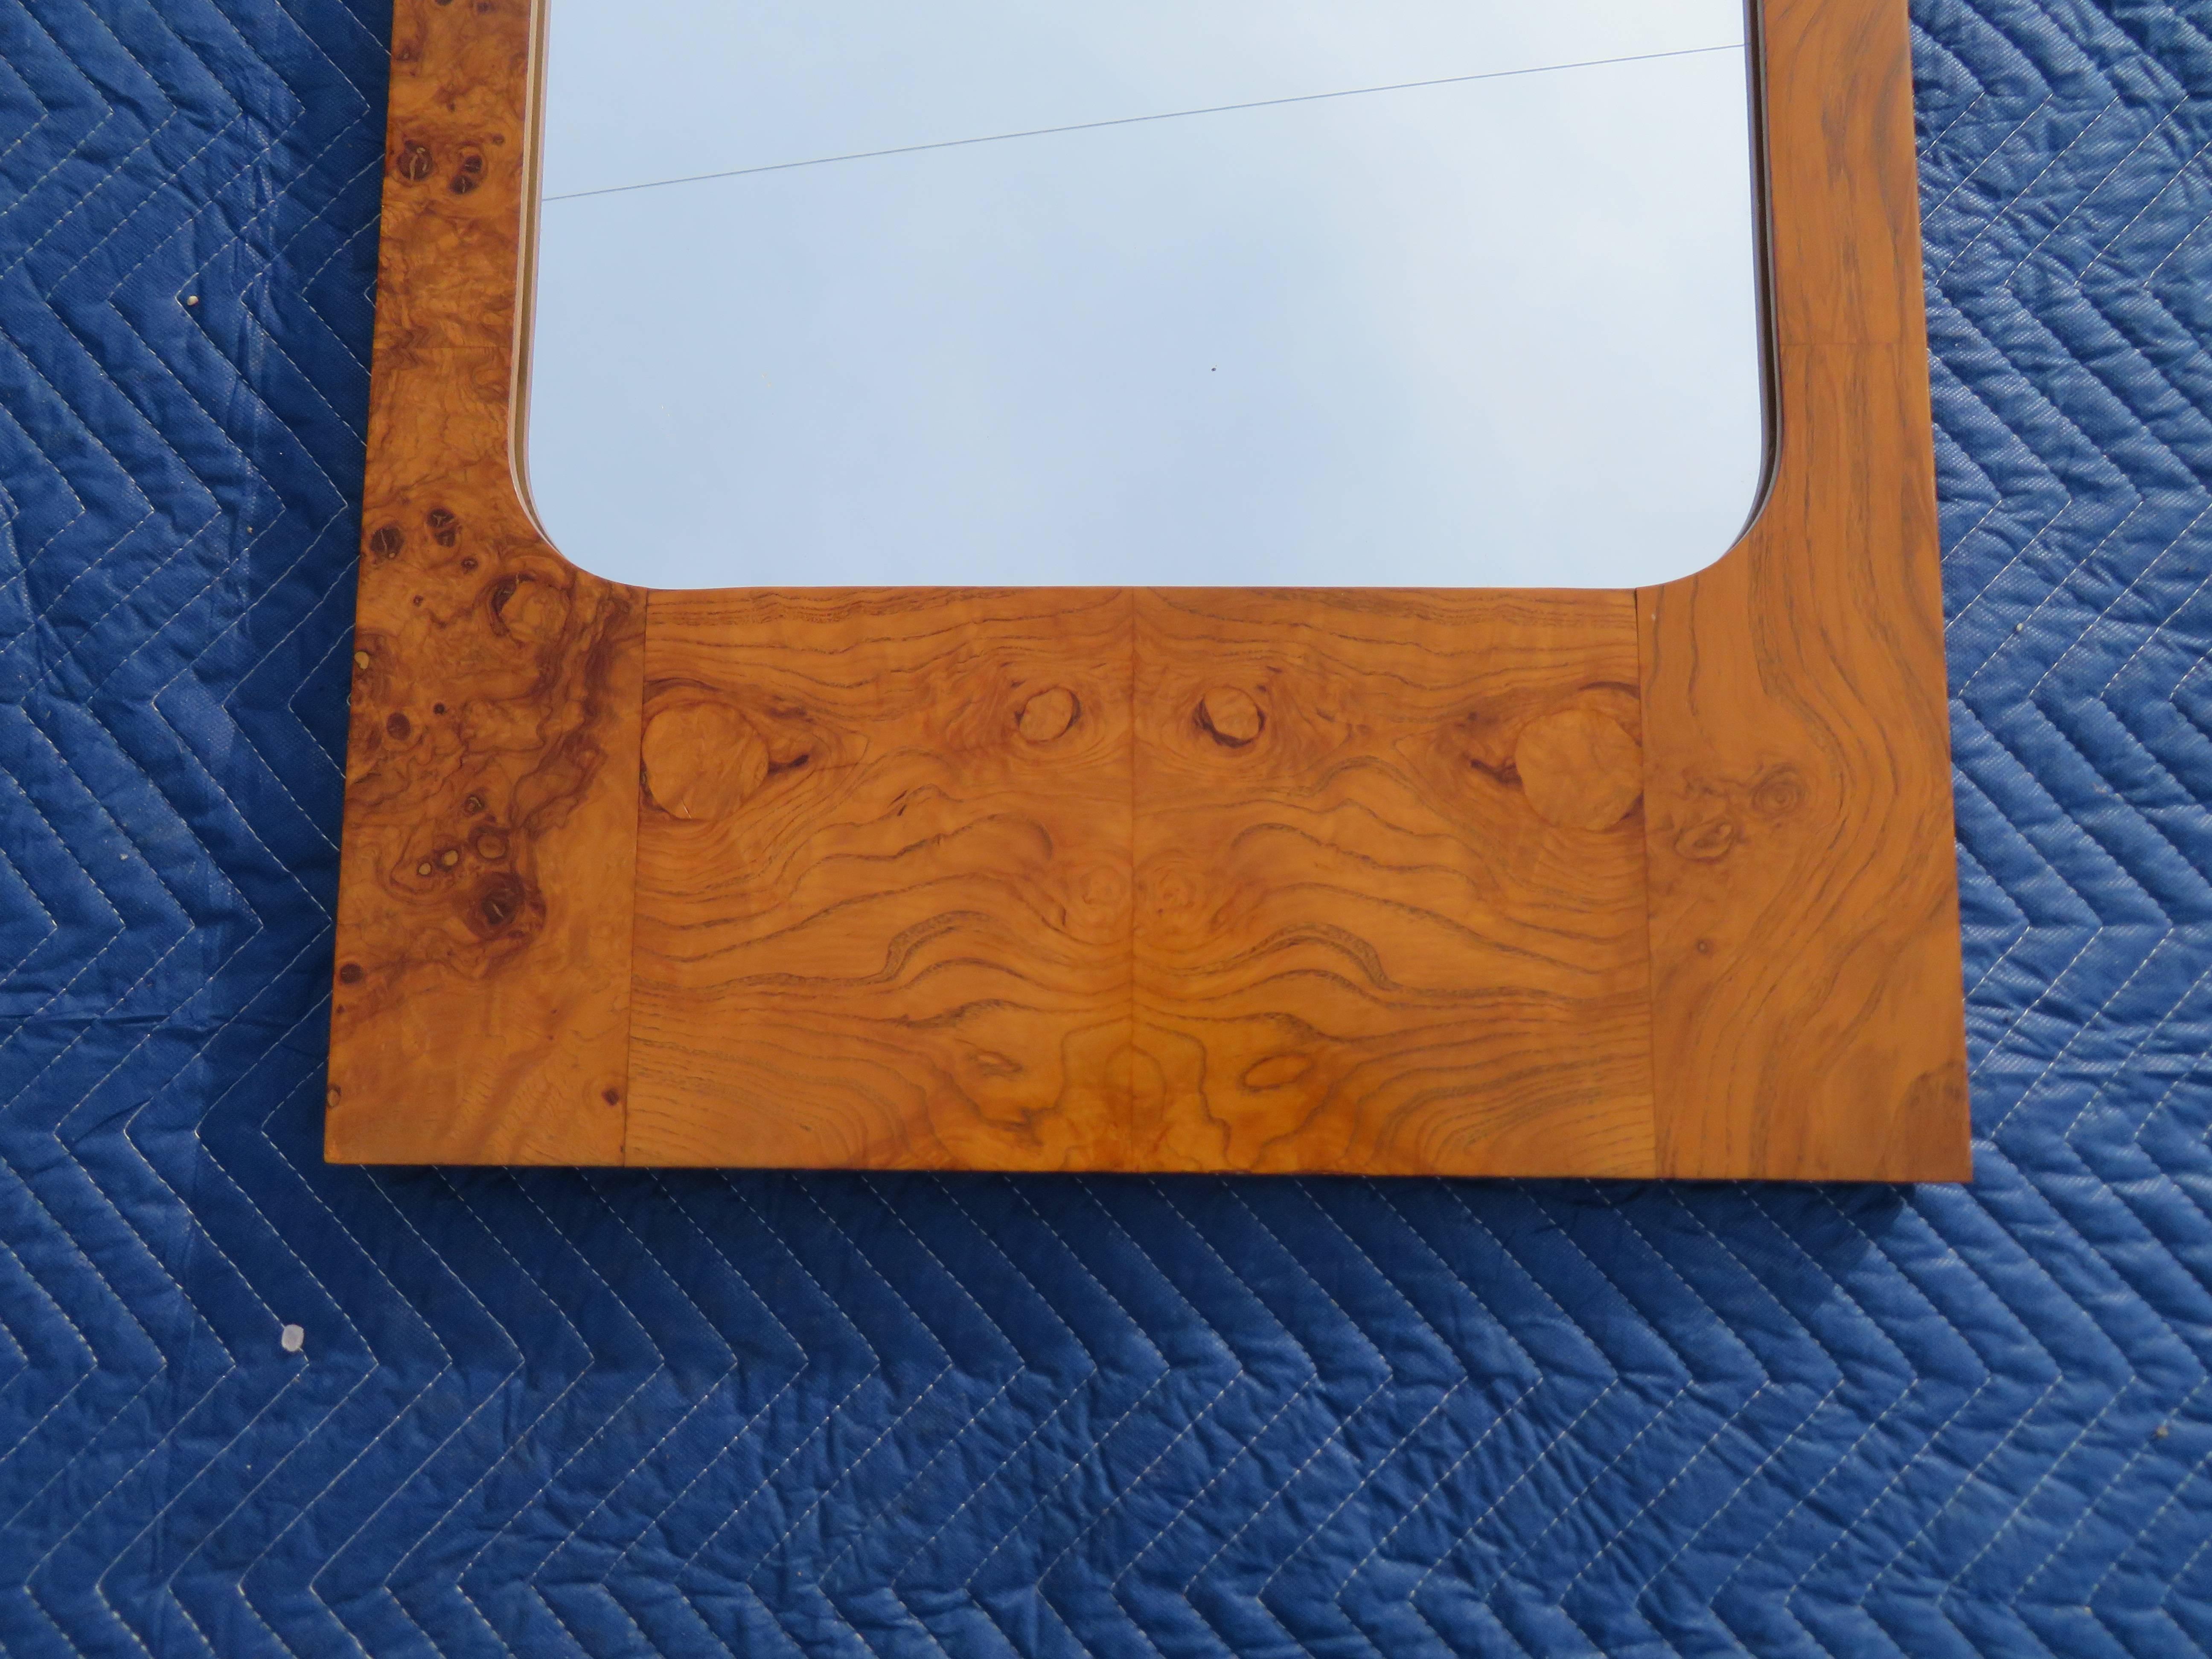 This gorgeous vintage modern mirror features a lovely burl olive wood frame. Sleek rectangular design with elegant wood grain throughout makes this wonderful mirror the perfect addition to any modern interior. 